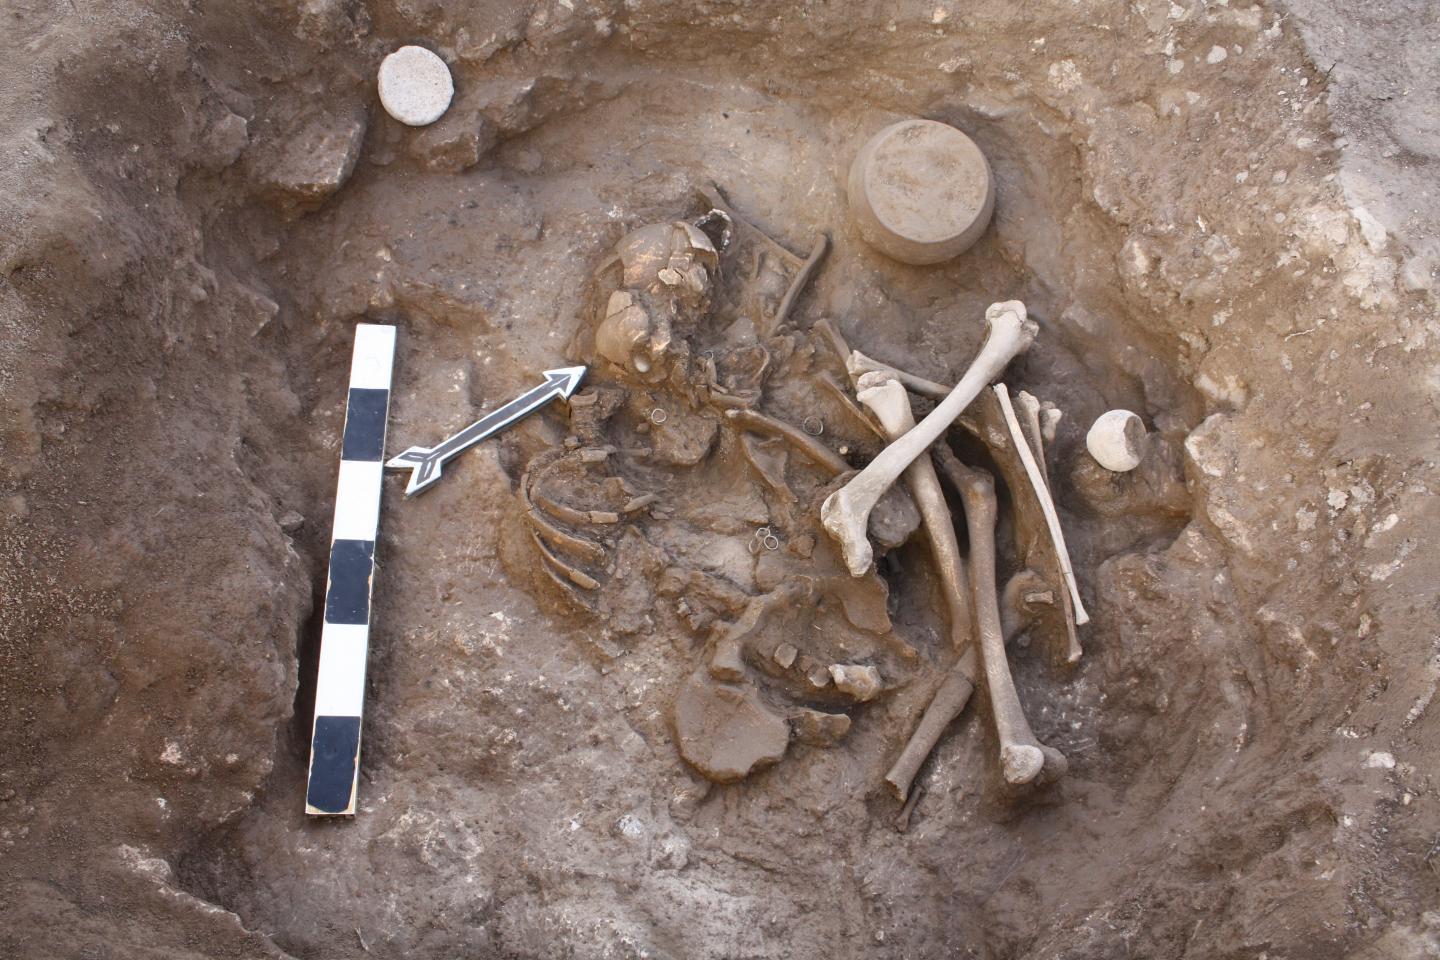 Human Remains in Armenia from Middle Bronze Age